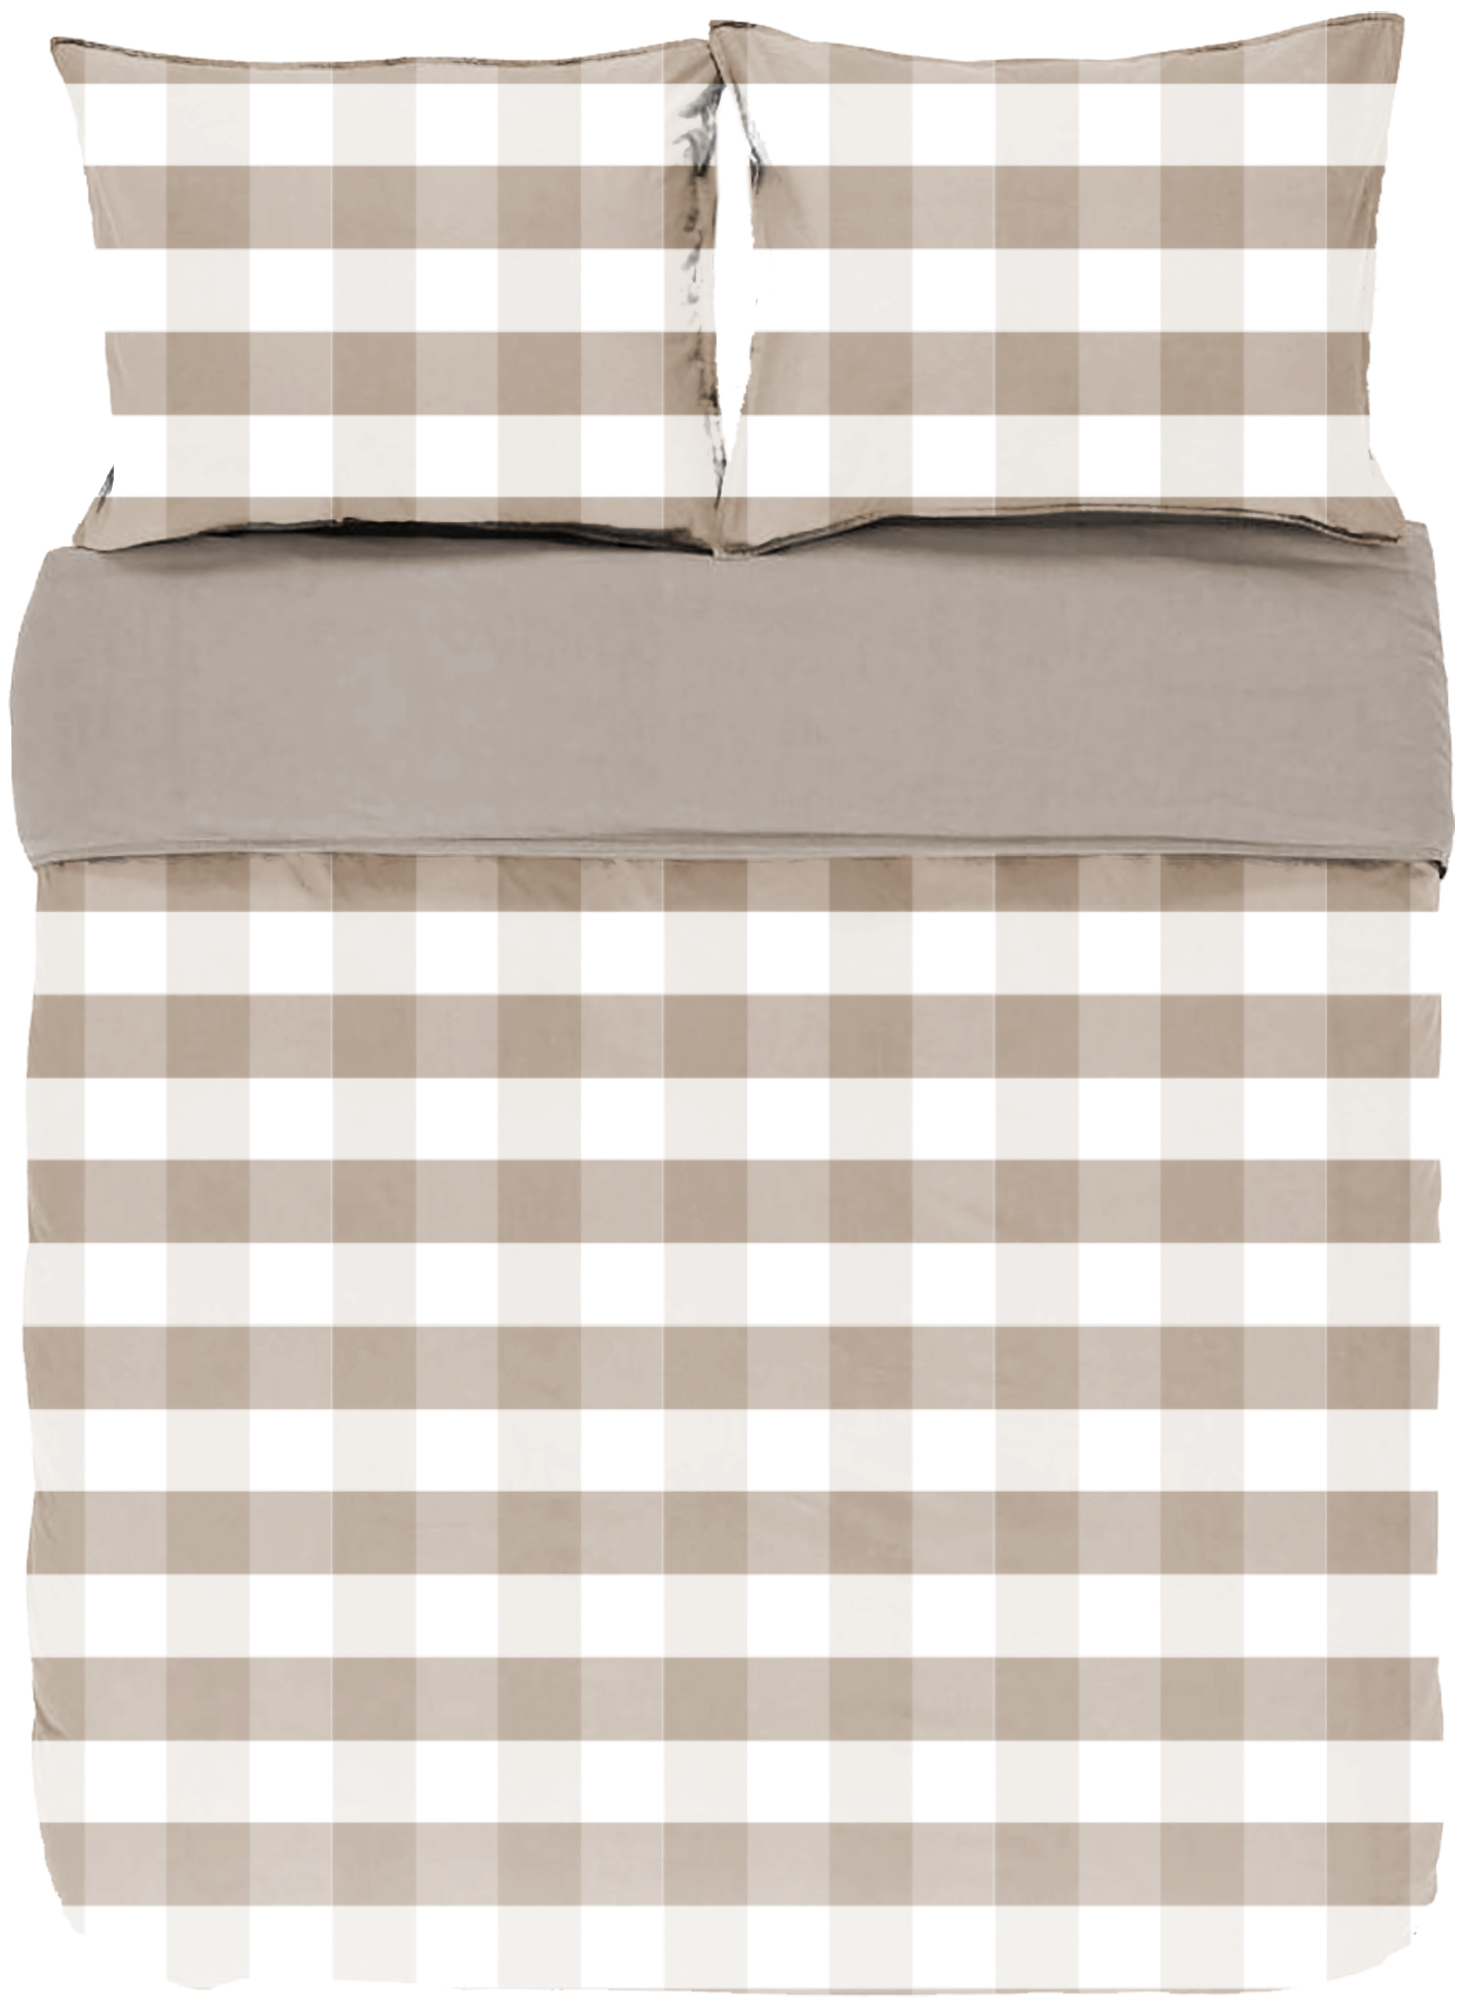 Duvet cover EMMA, Stone washed check cotton, 240x220, taupe